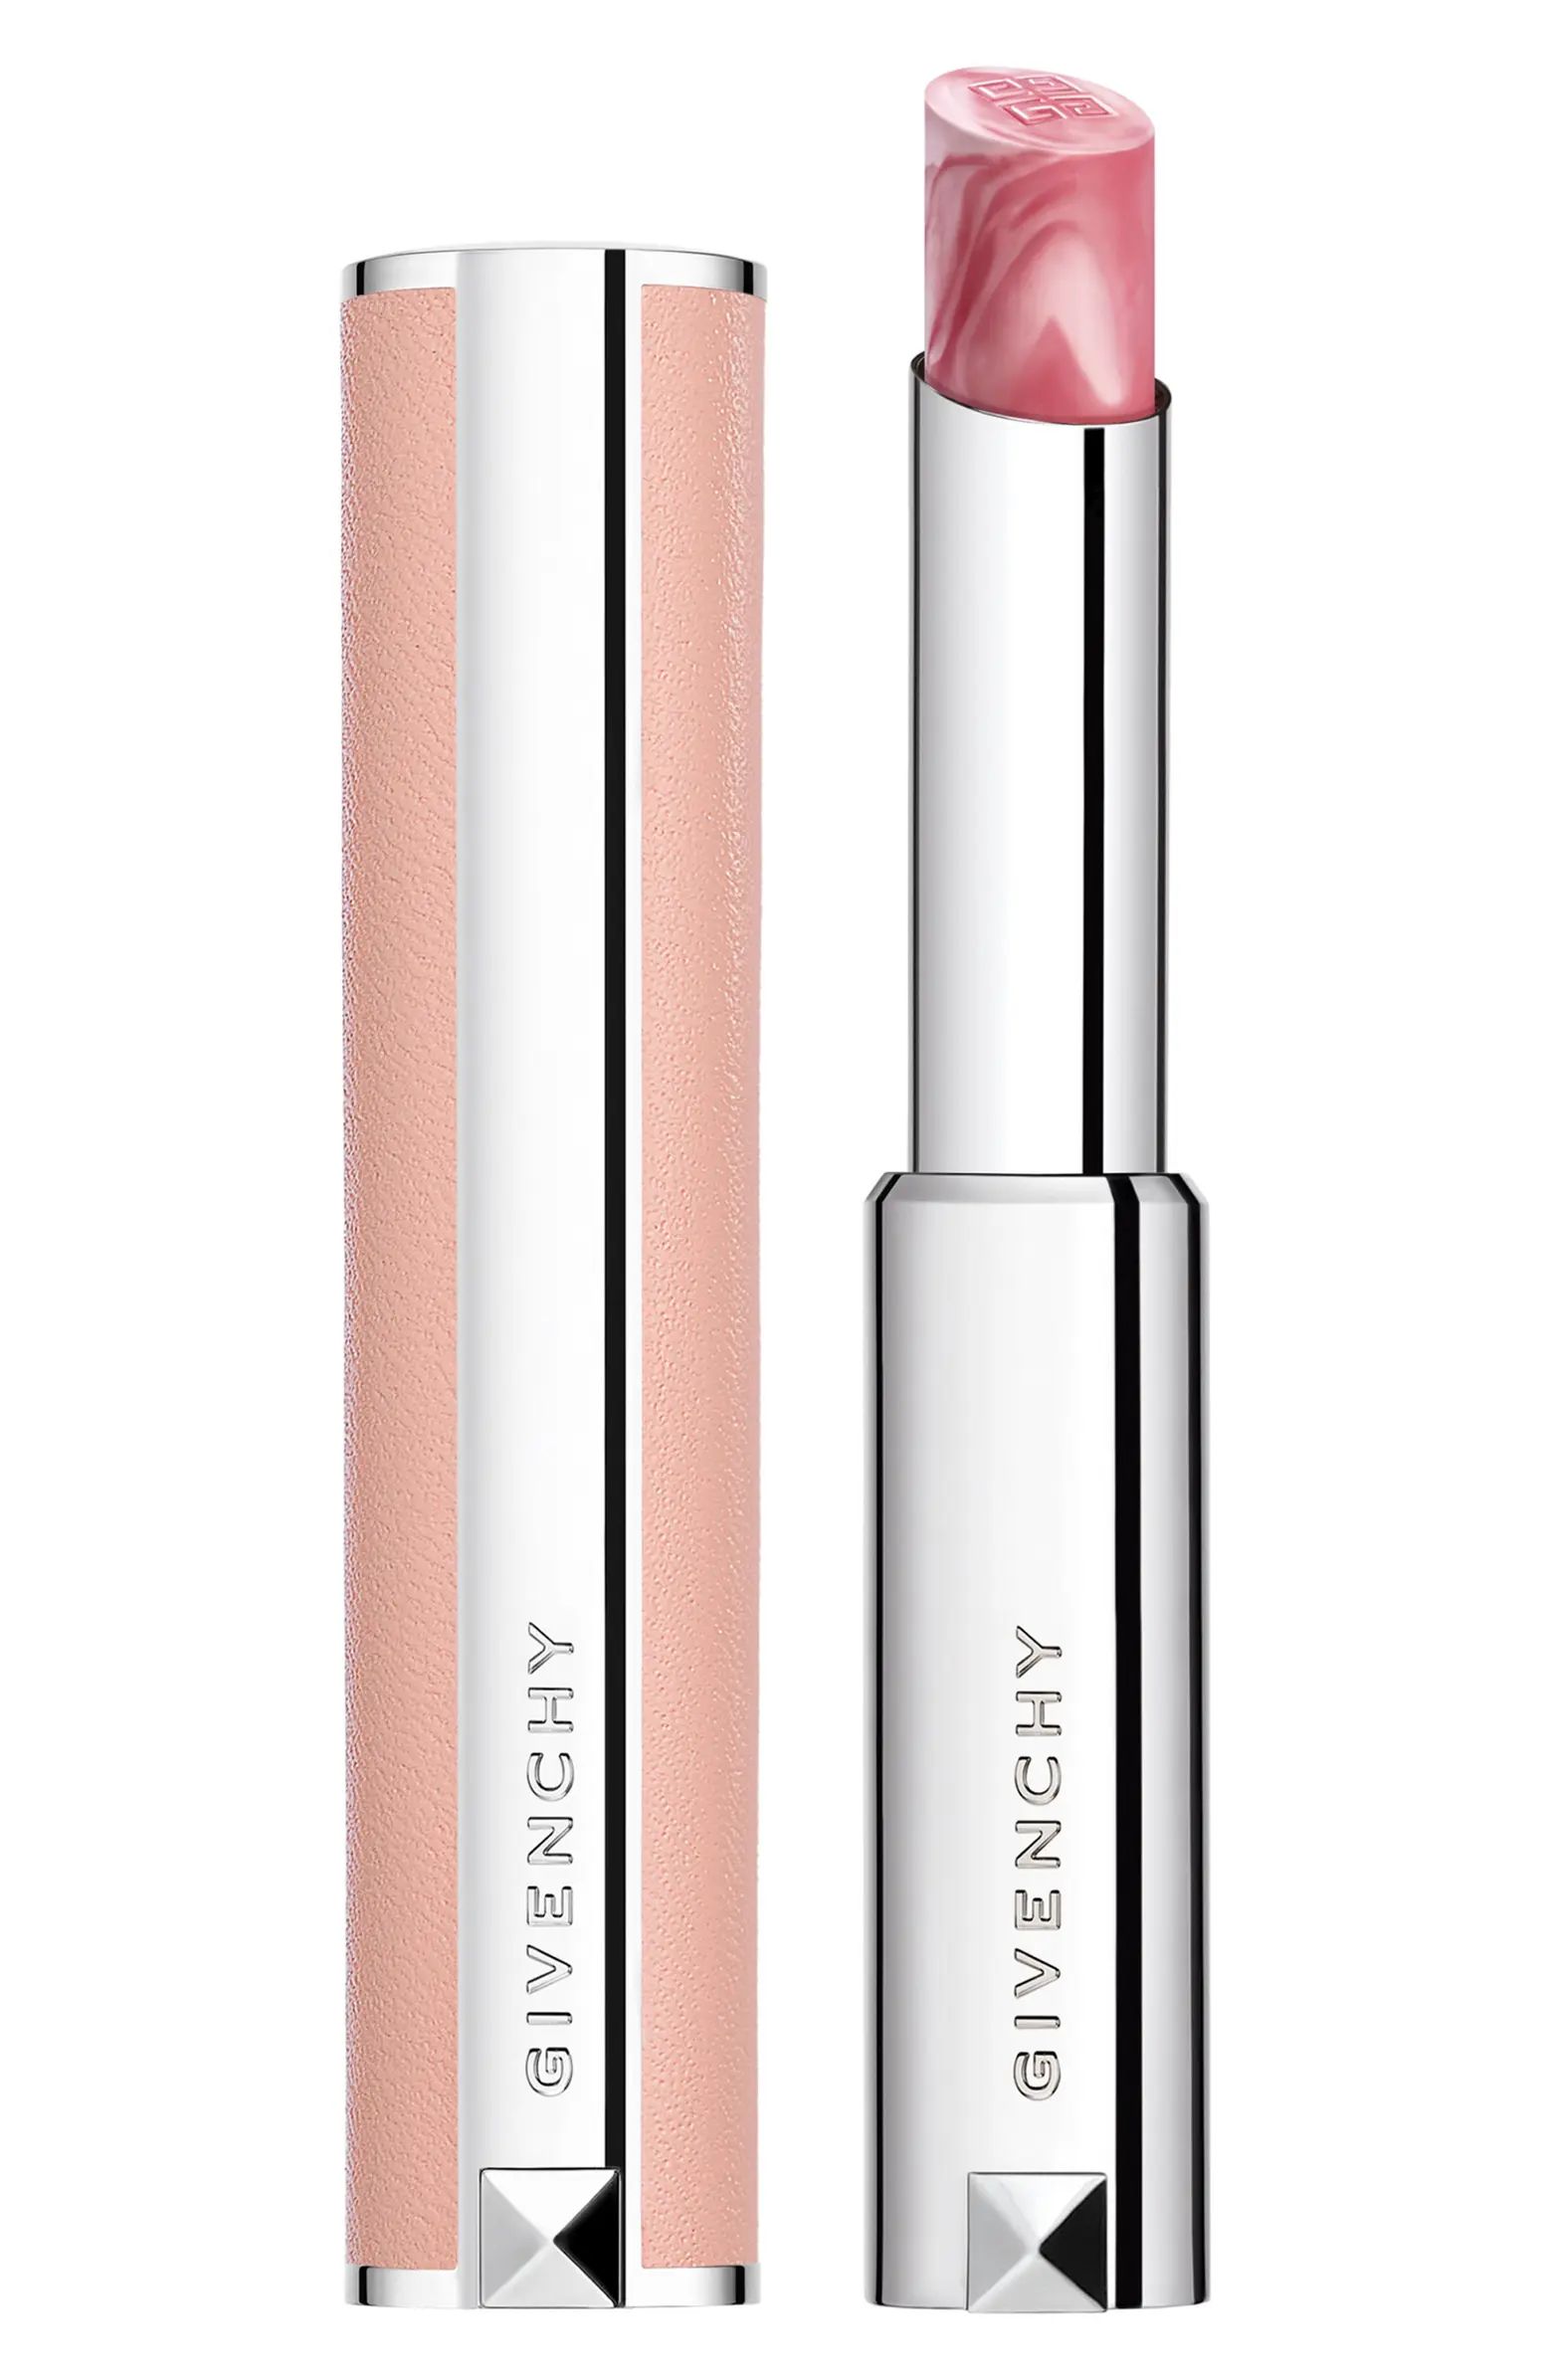 Le Rose Hydrating Lip Balm | Nordstrom